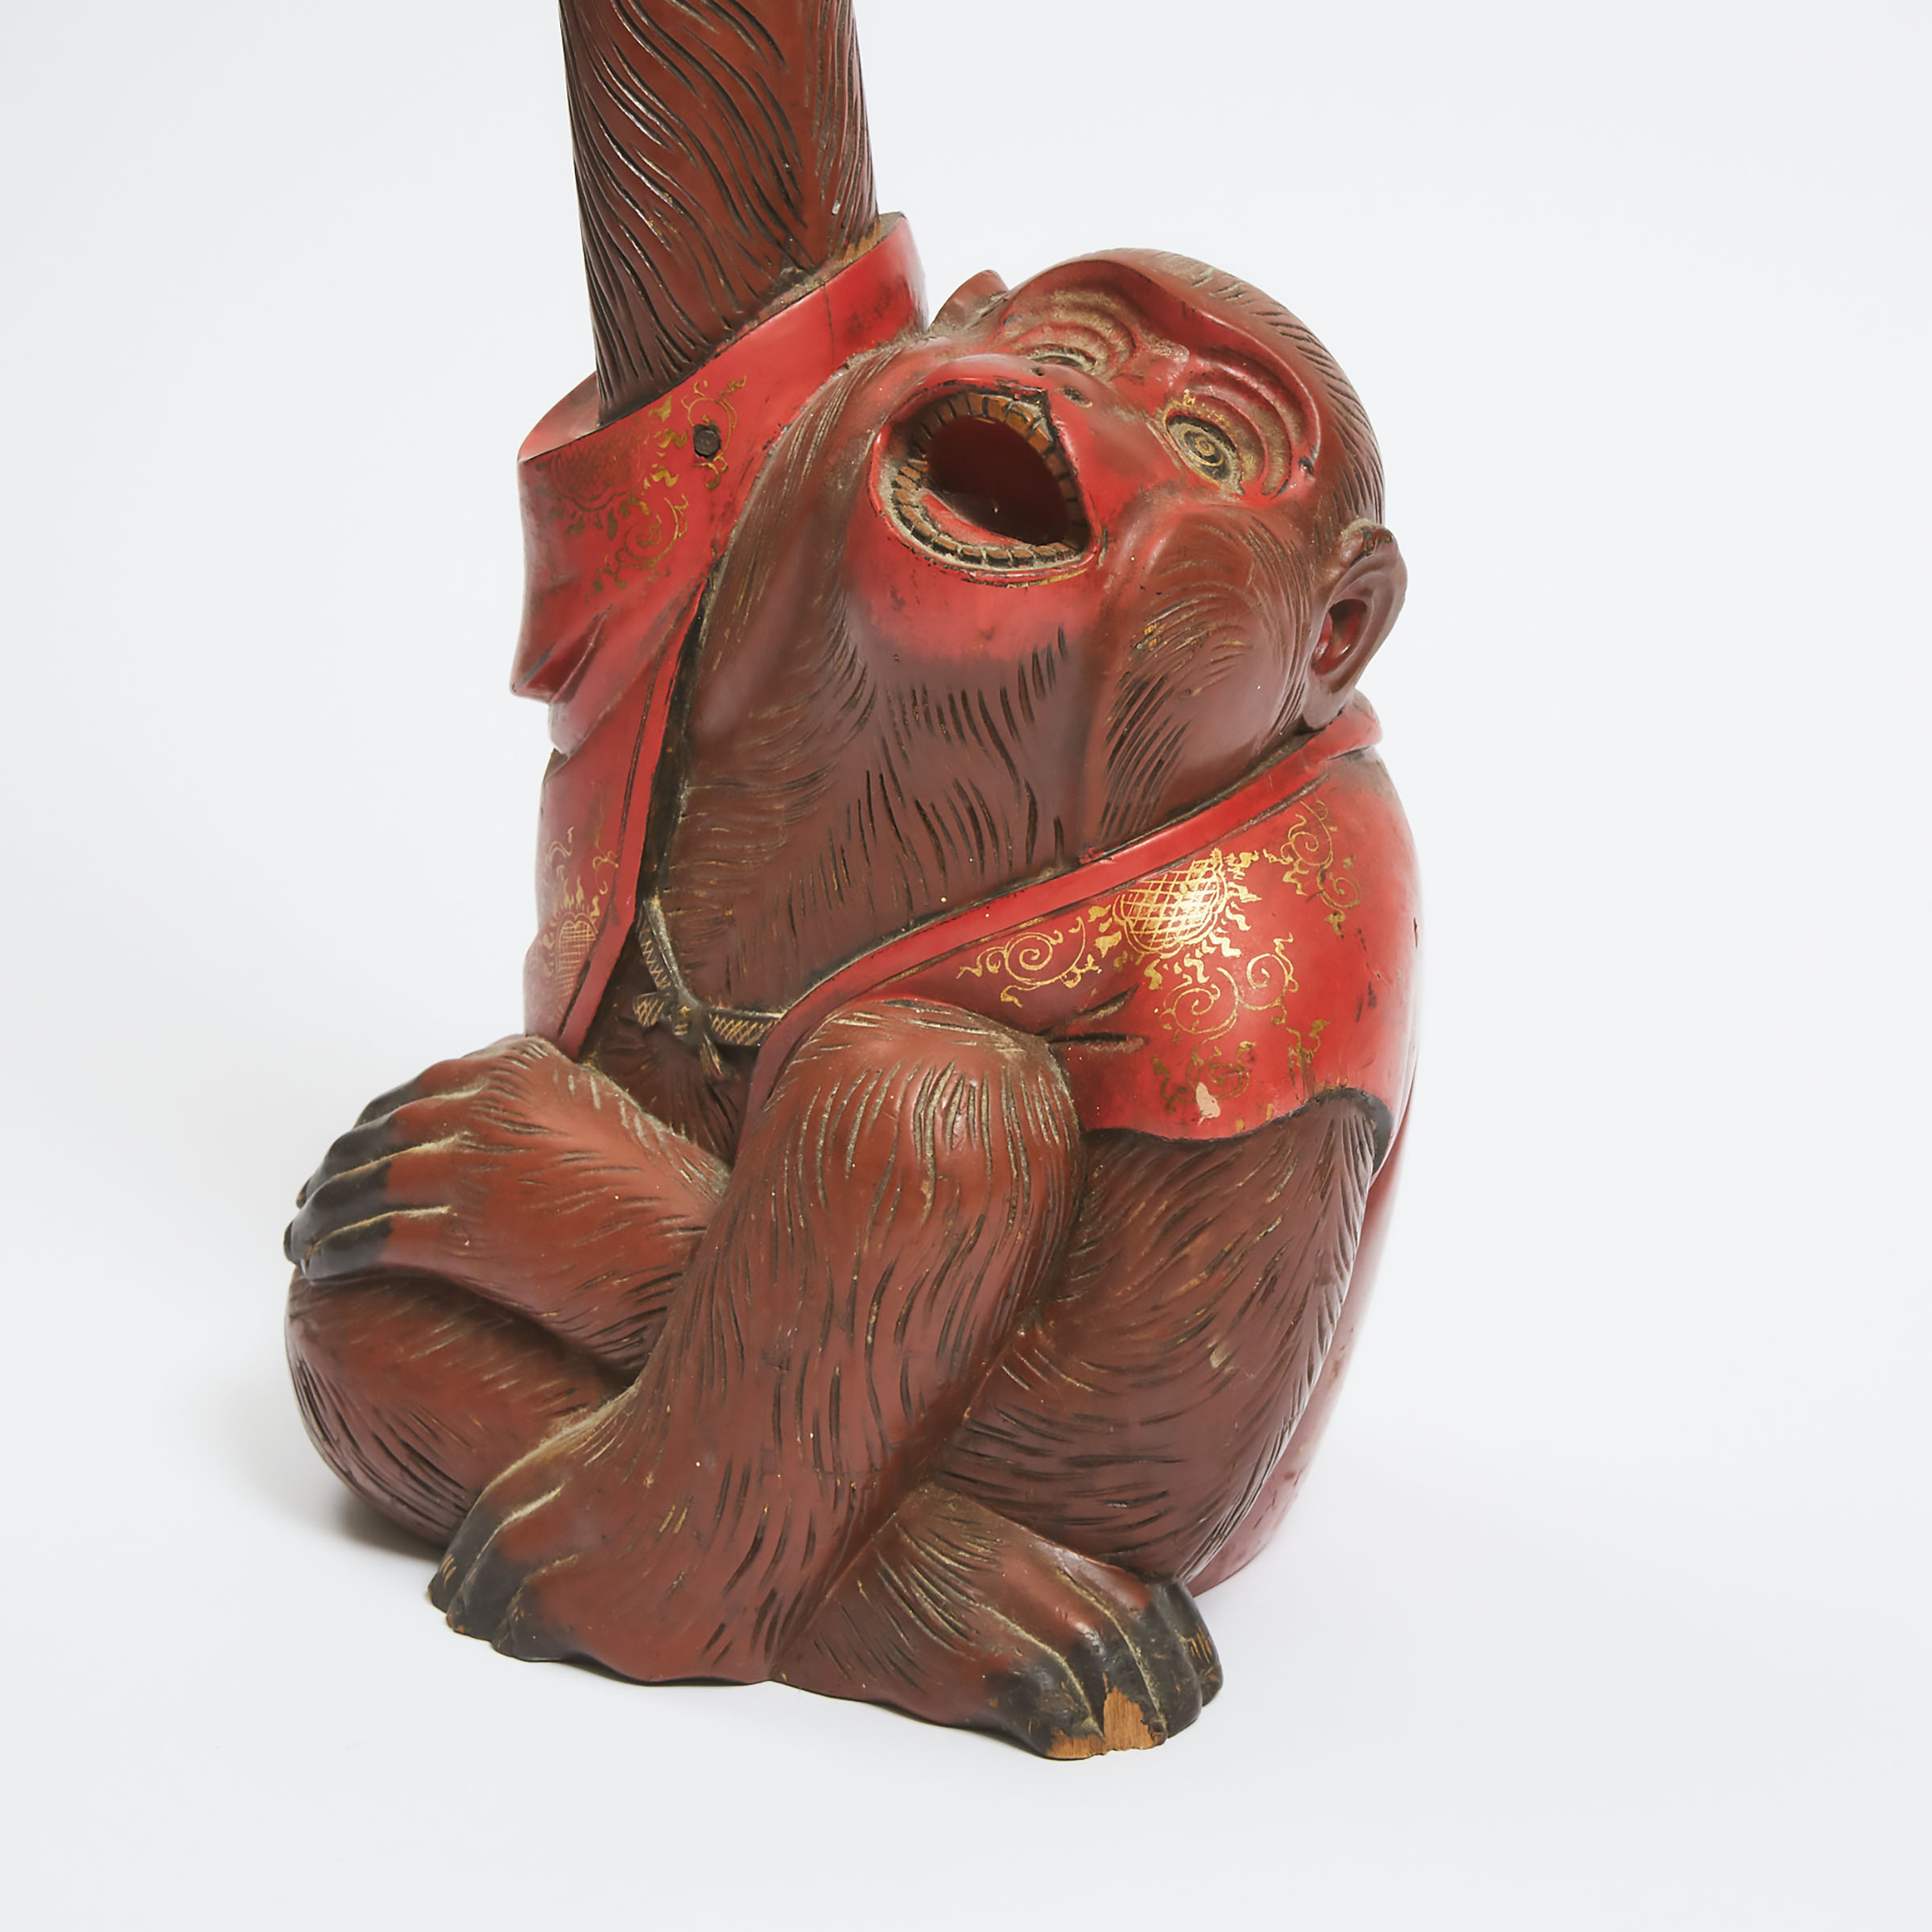 A Large Japanese Red Lacquered Wood Candlestick in the Form of a Monkey